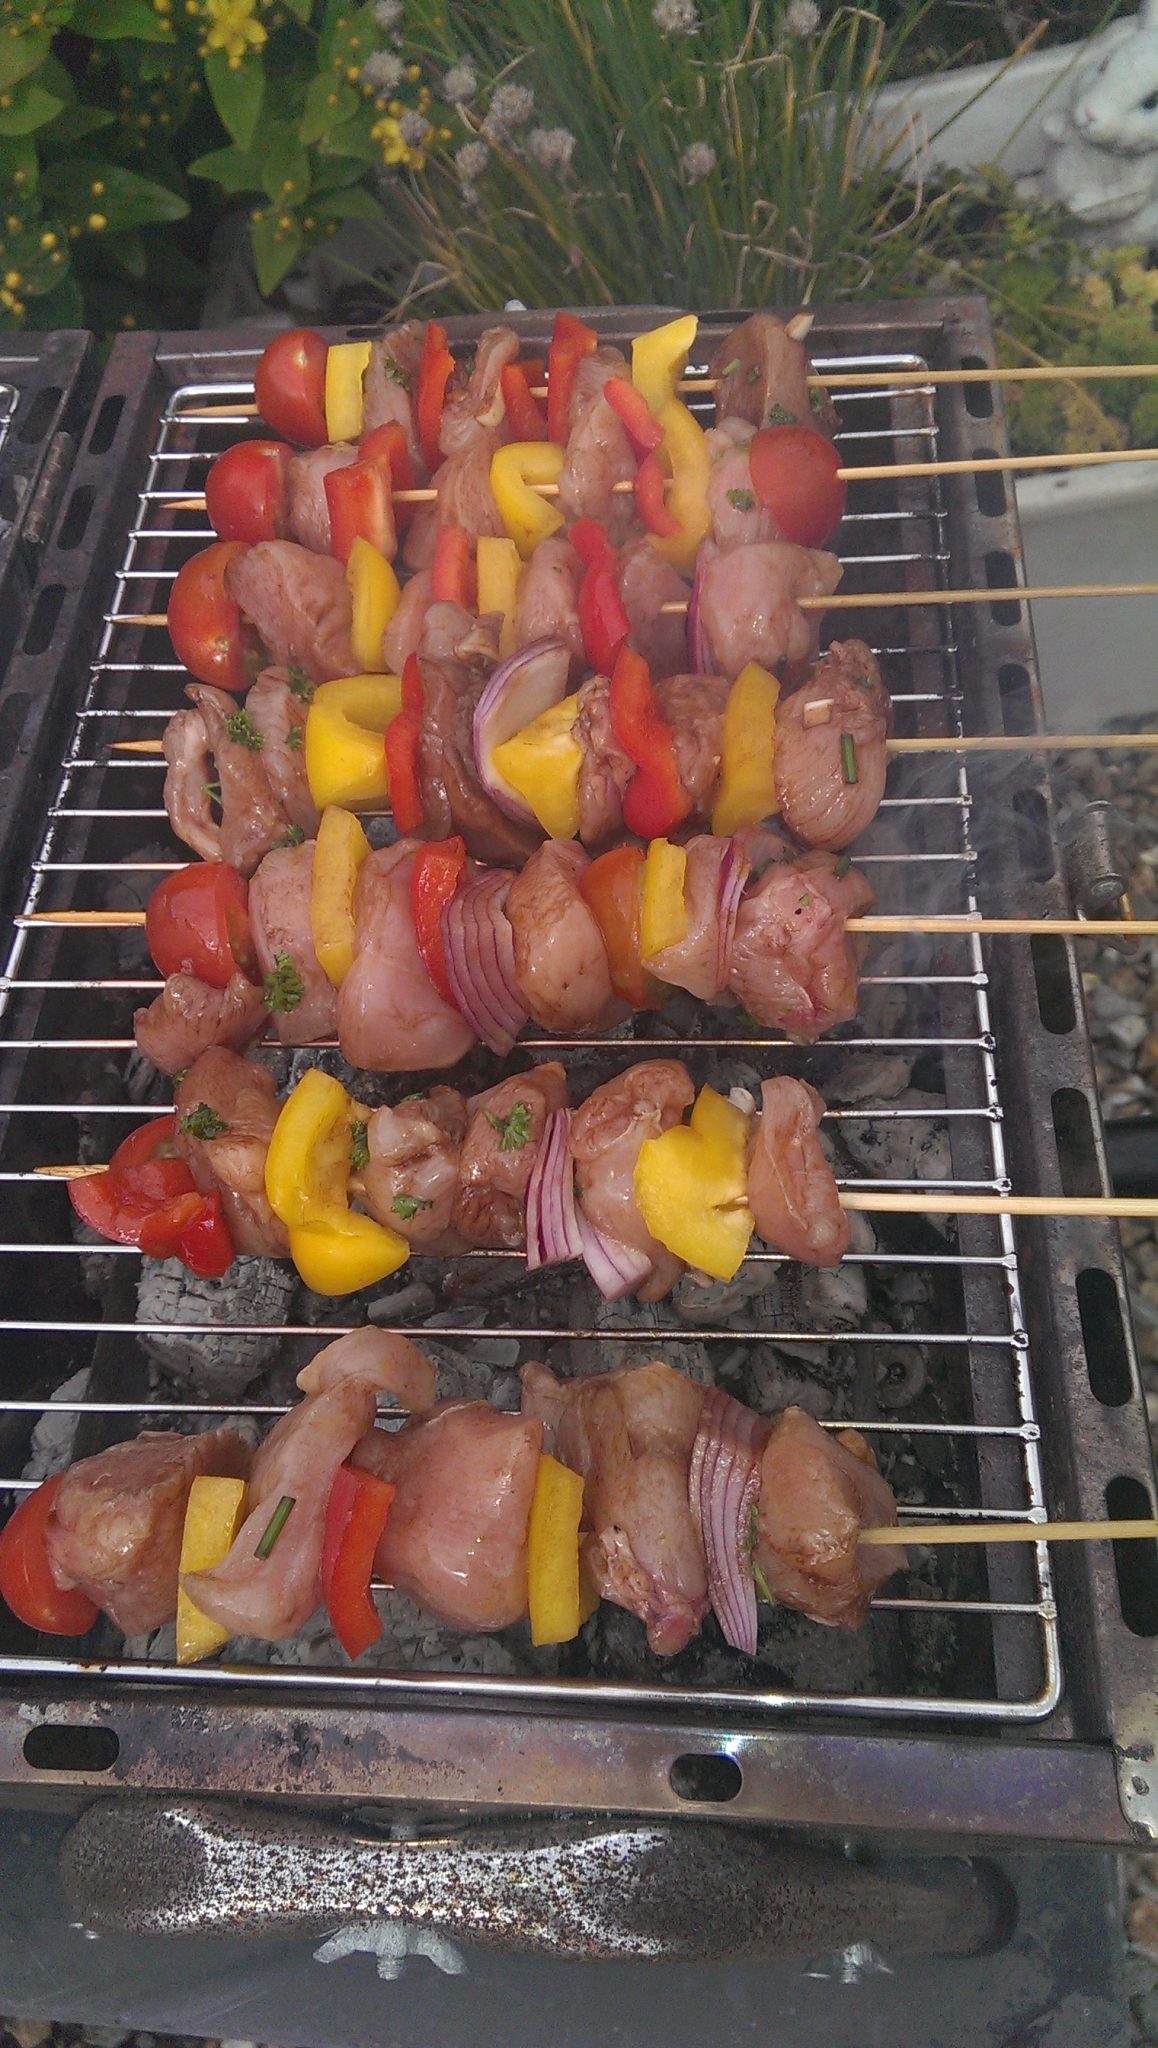 Chicken Shish kebabs on barbeque